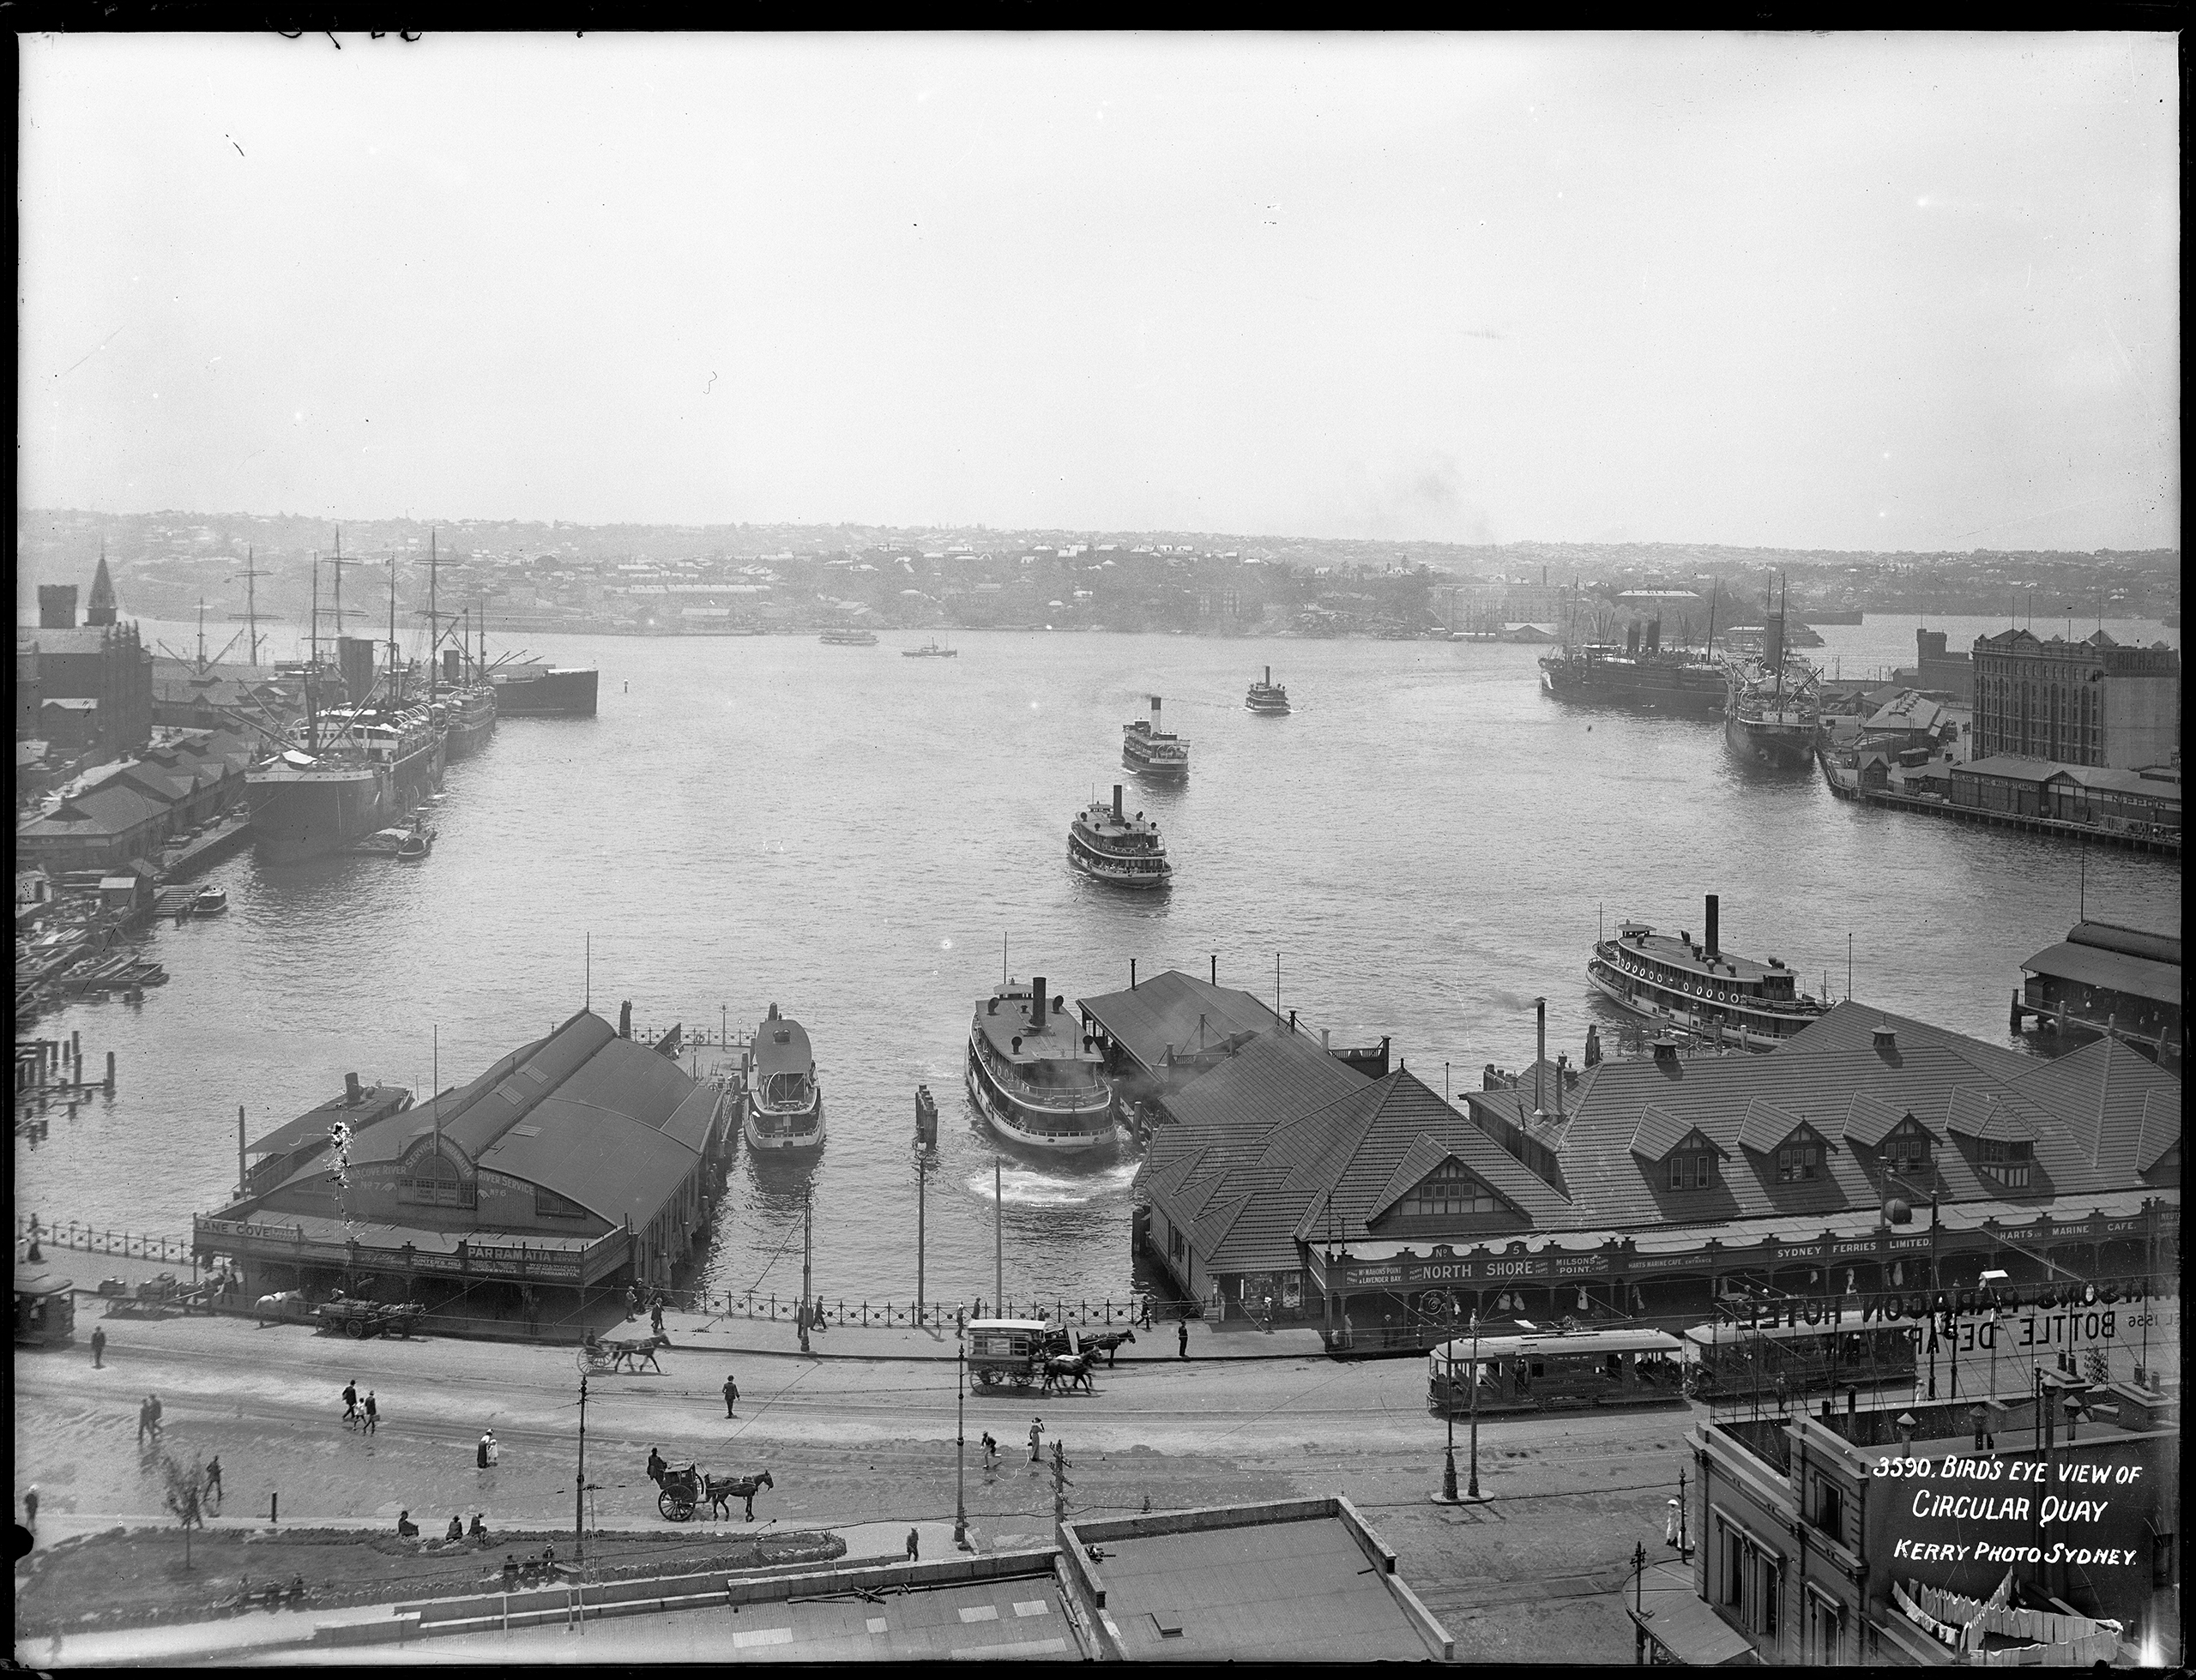 Glass negative of Sydney's Circular Quay showing ferries, ferry wharves, ocean liners, trams and hansom cabs, 1906-1910